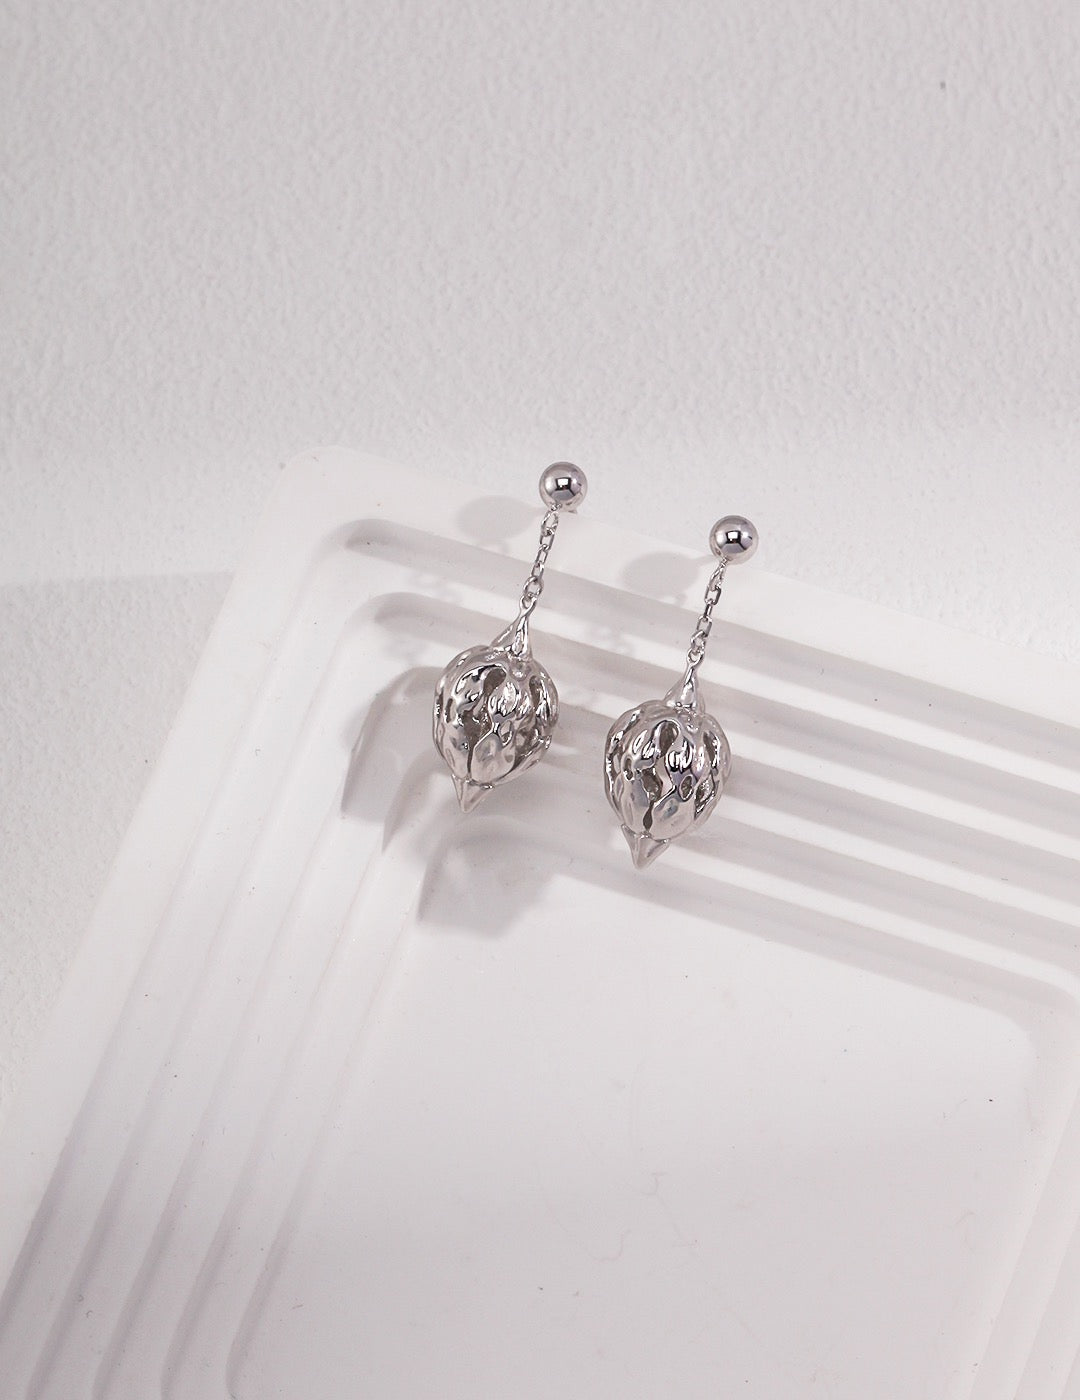 Quality Craftsmanship Detail of S925 Silver Earrings